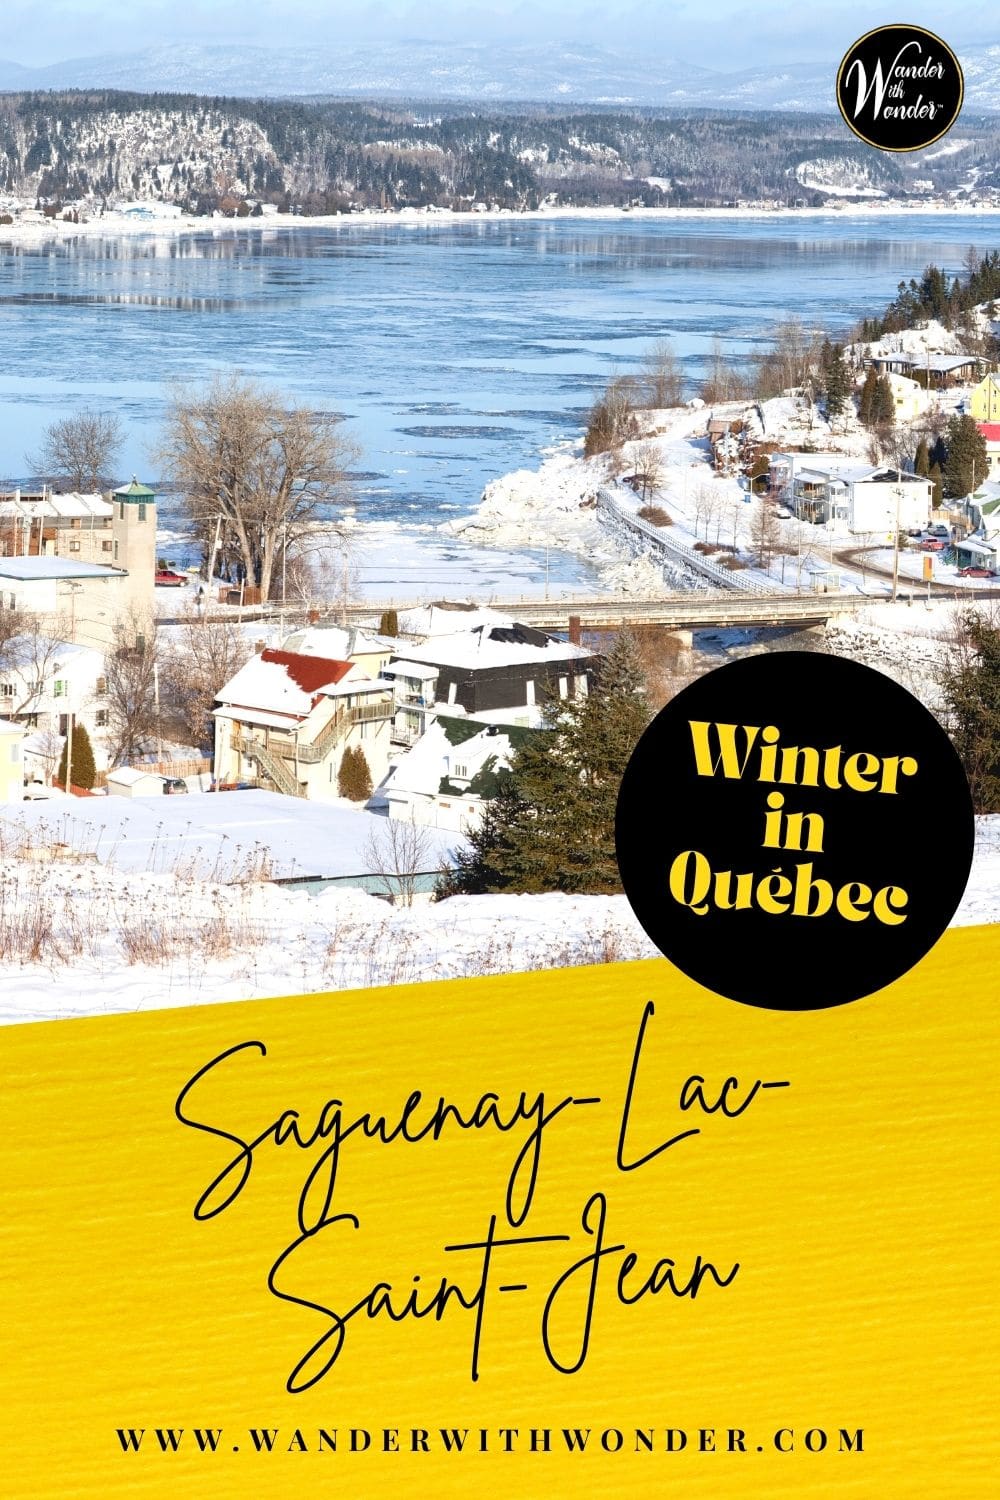 A winter visit to Québec has long been on my bucket list. The trip to Saguenay-Lac-Saint-Jean was an unexpected detour from Carnaval in Québec City, but made my bucketlist travels even more memorable.